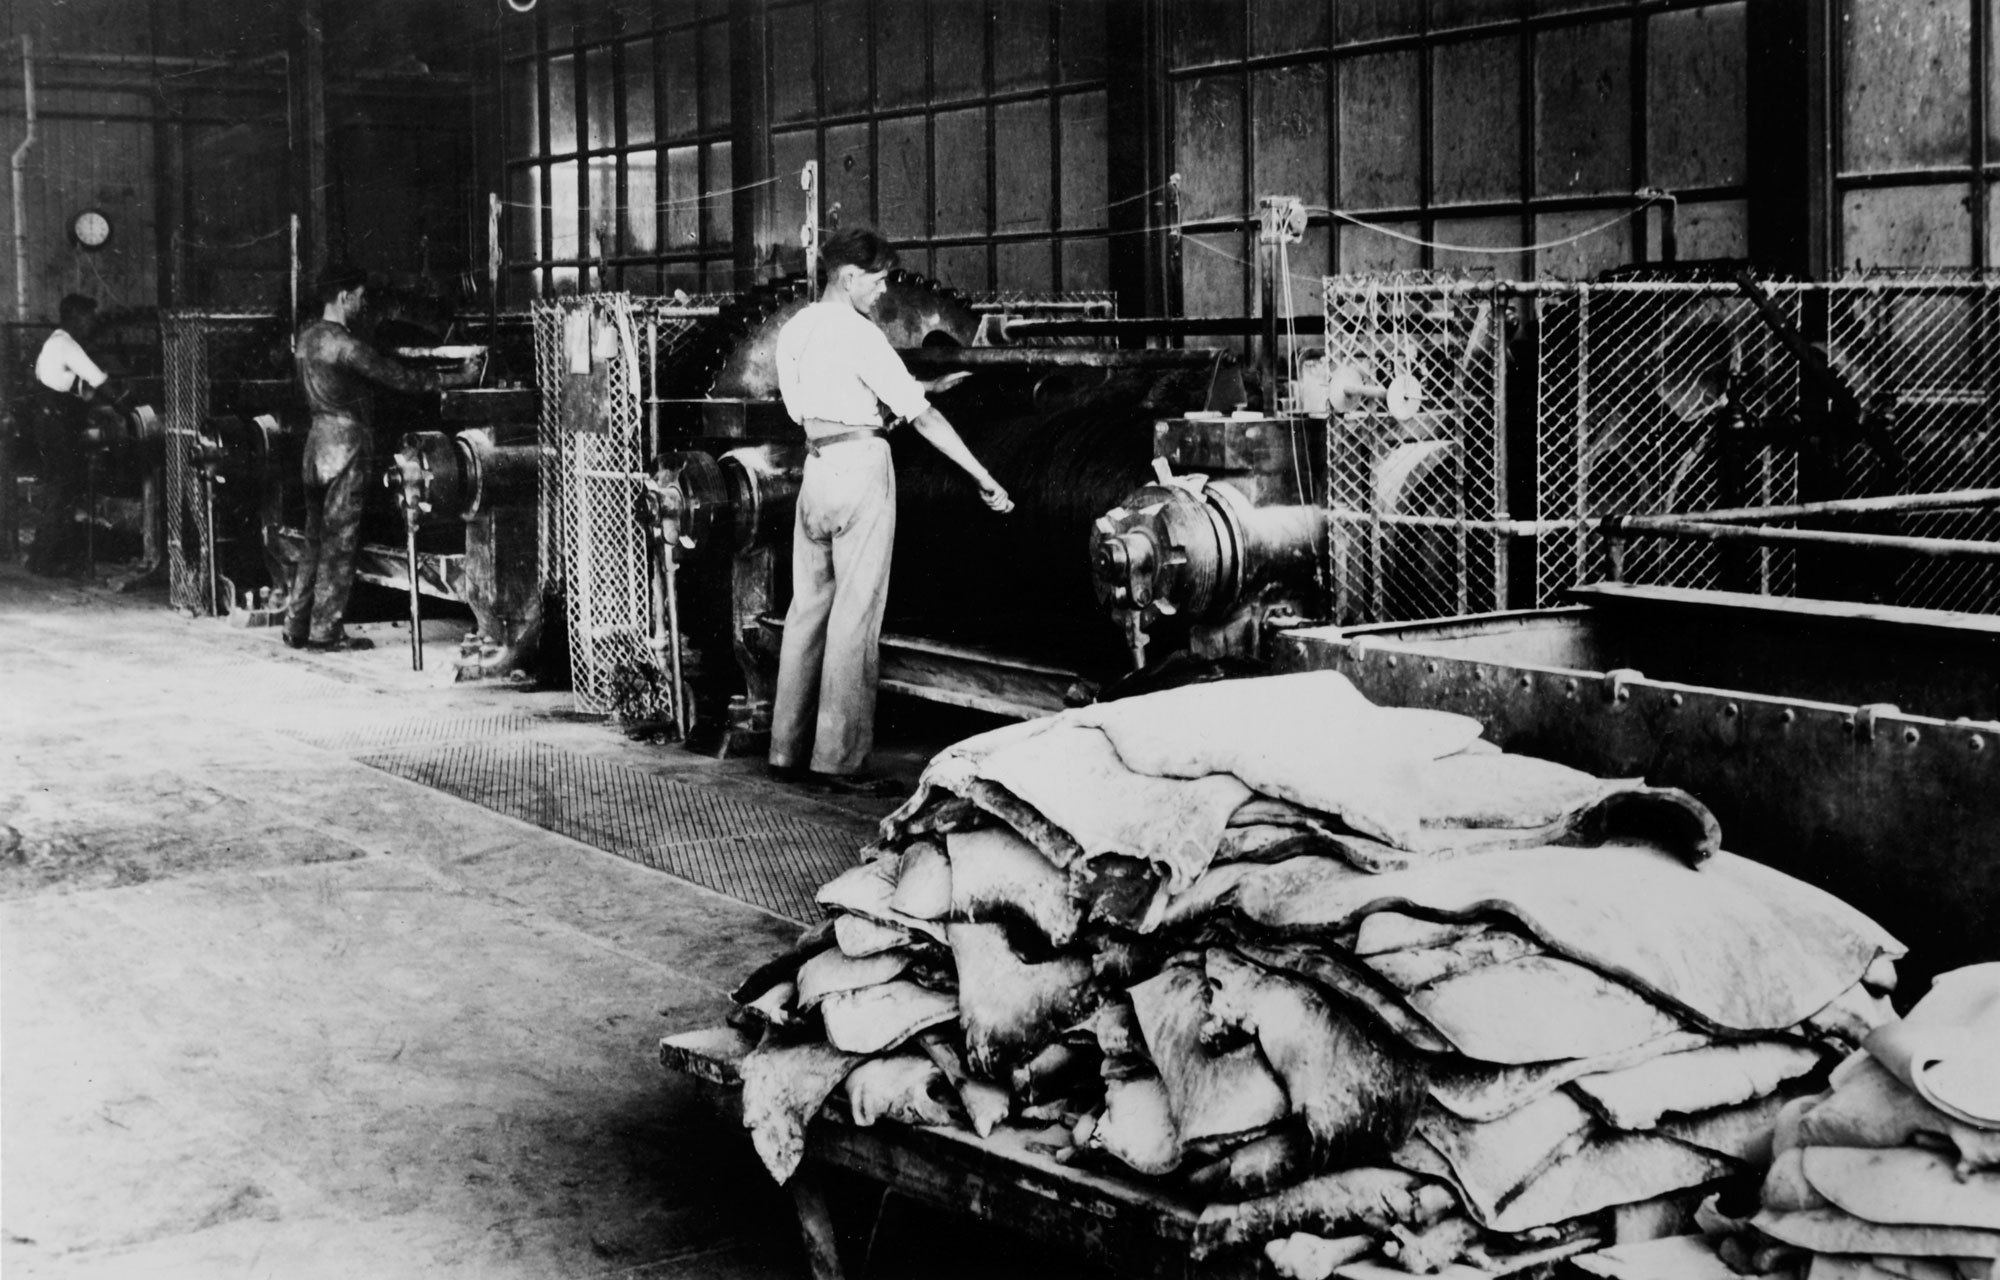 Workers in a factory